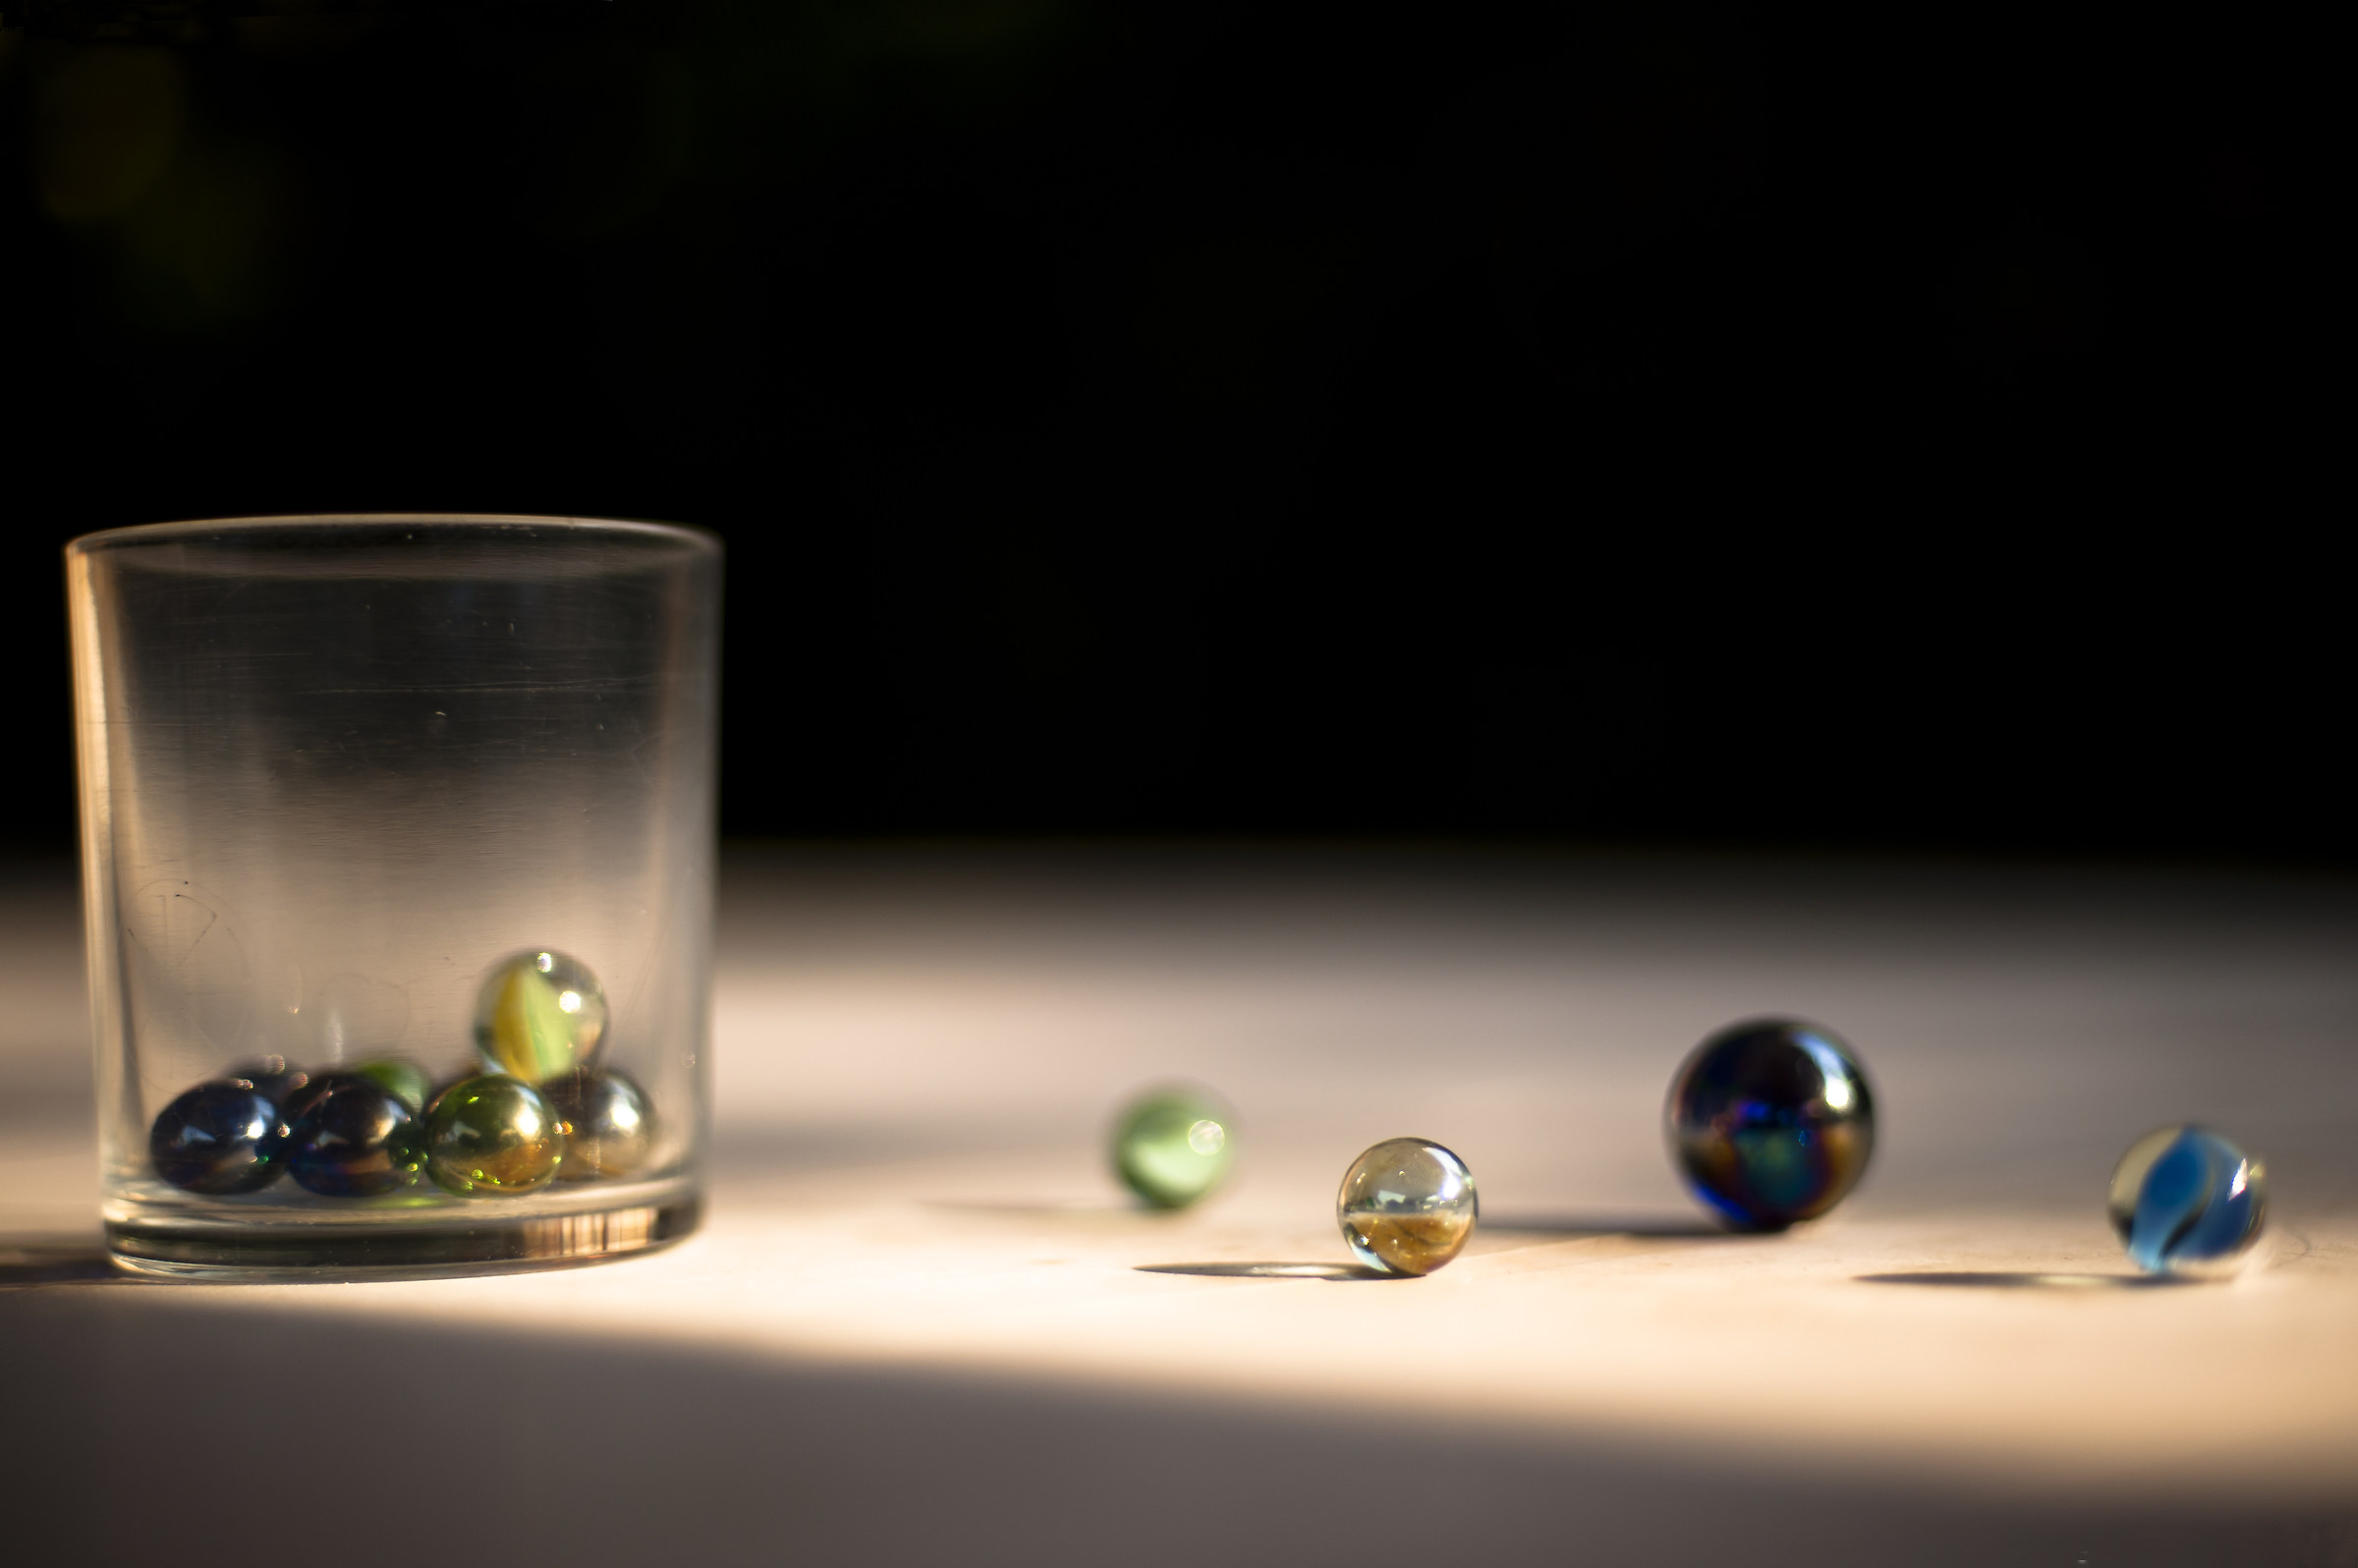 The game of glass beads...